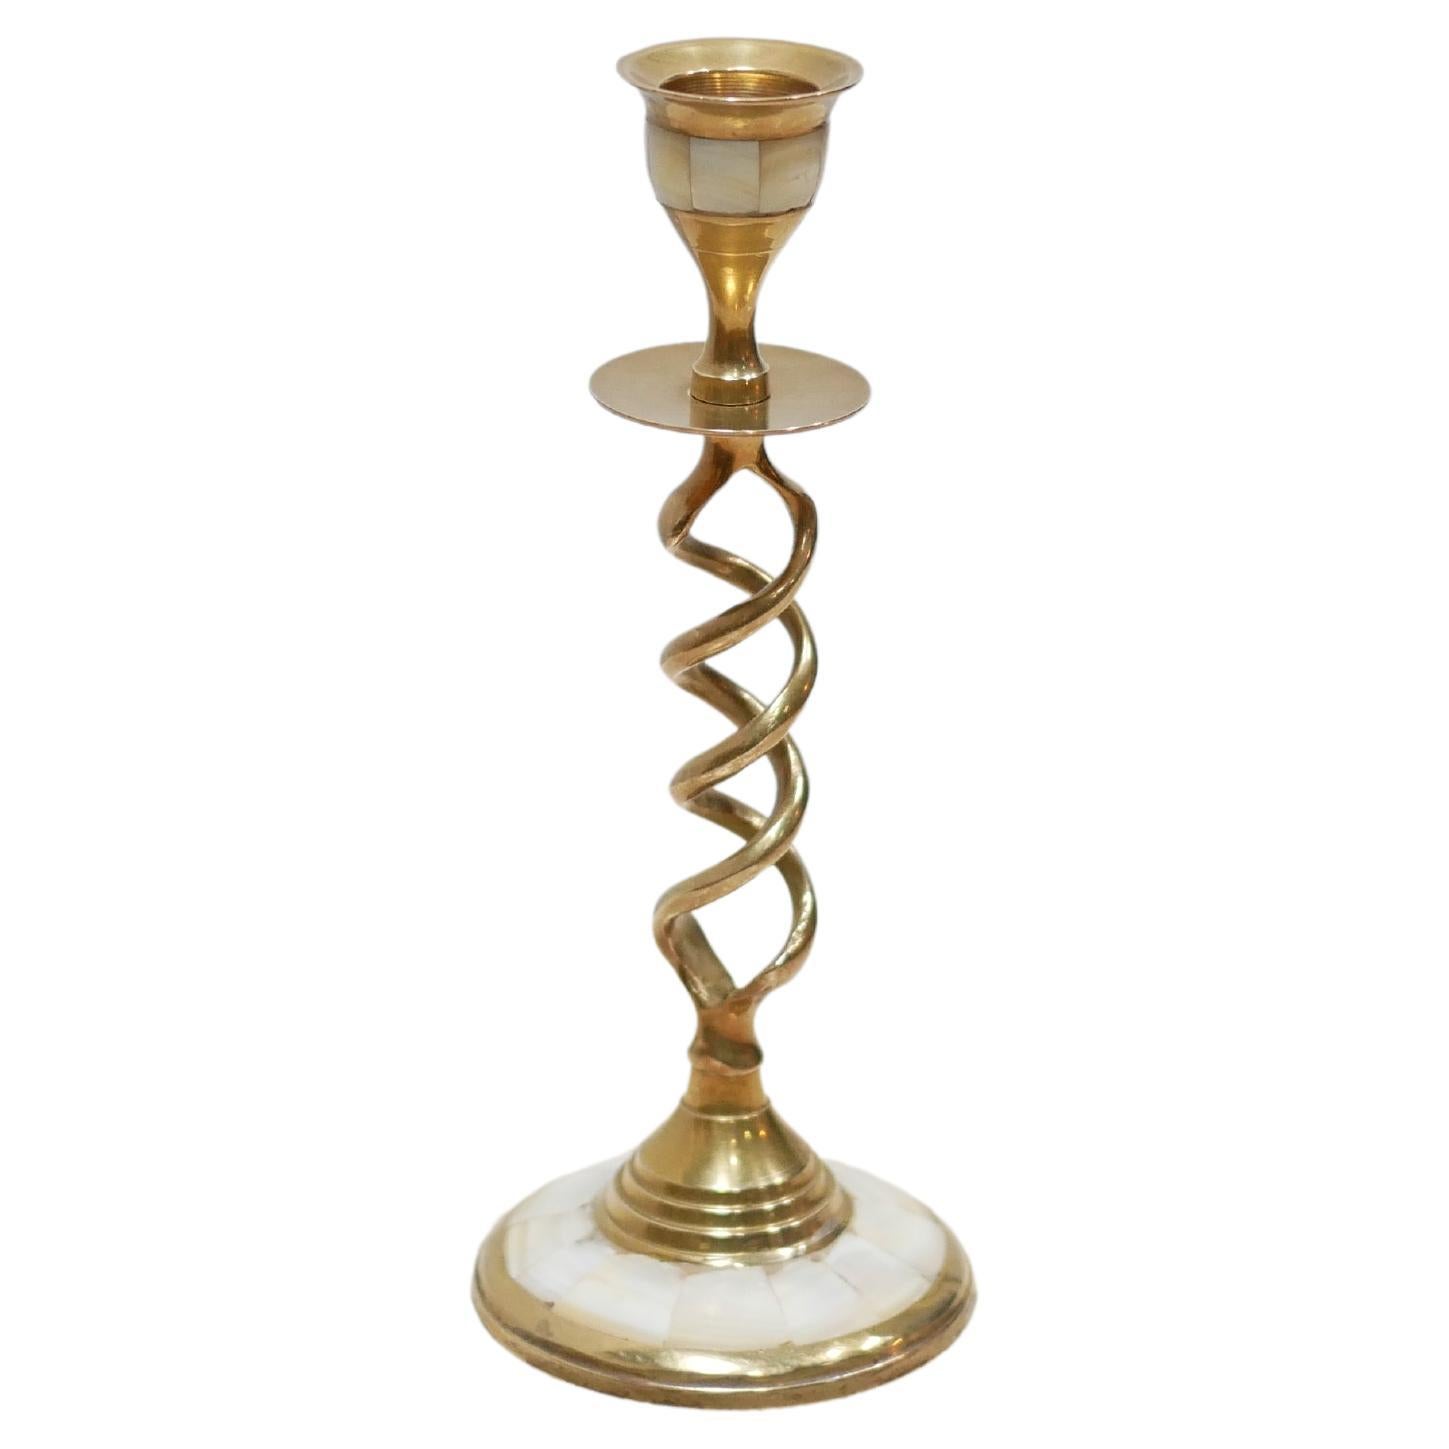 Vintage Brass and Mother-of-pearl Candlestick